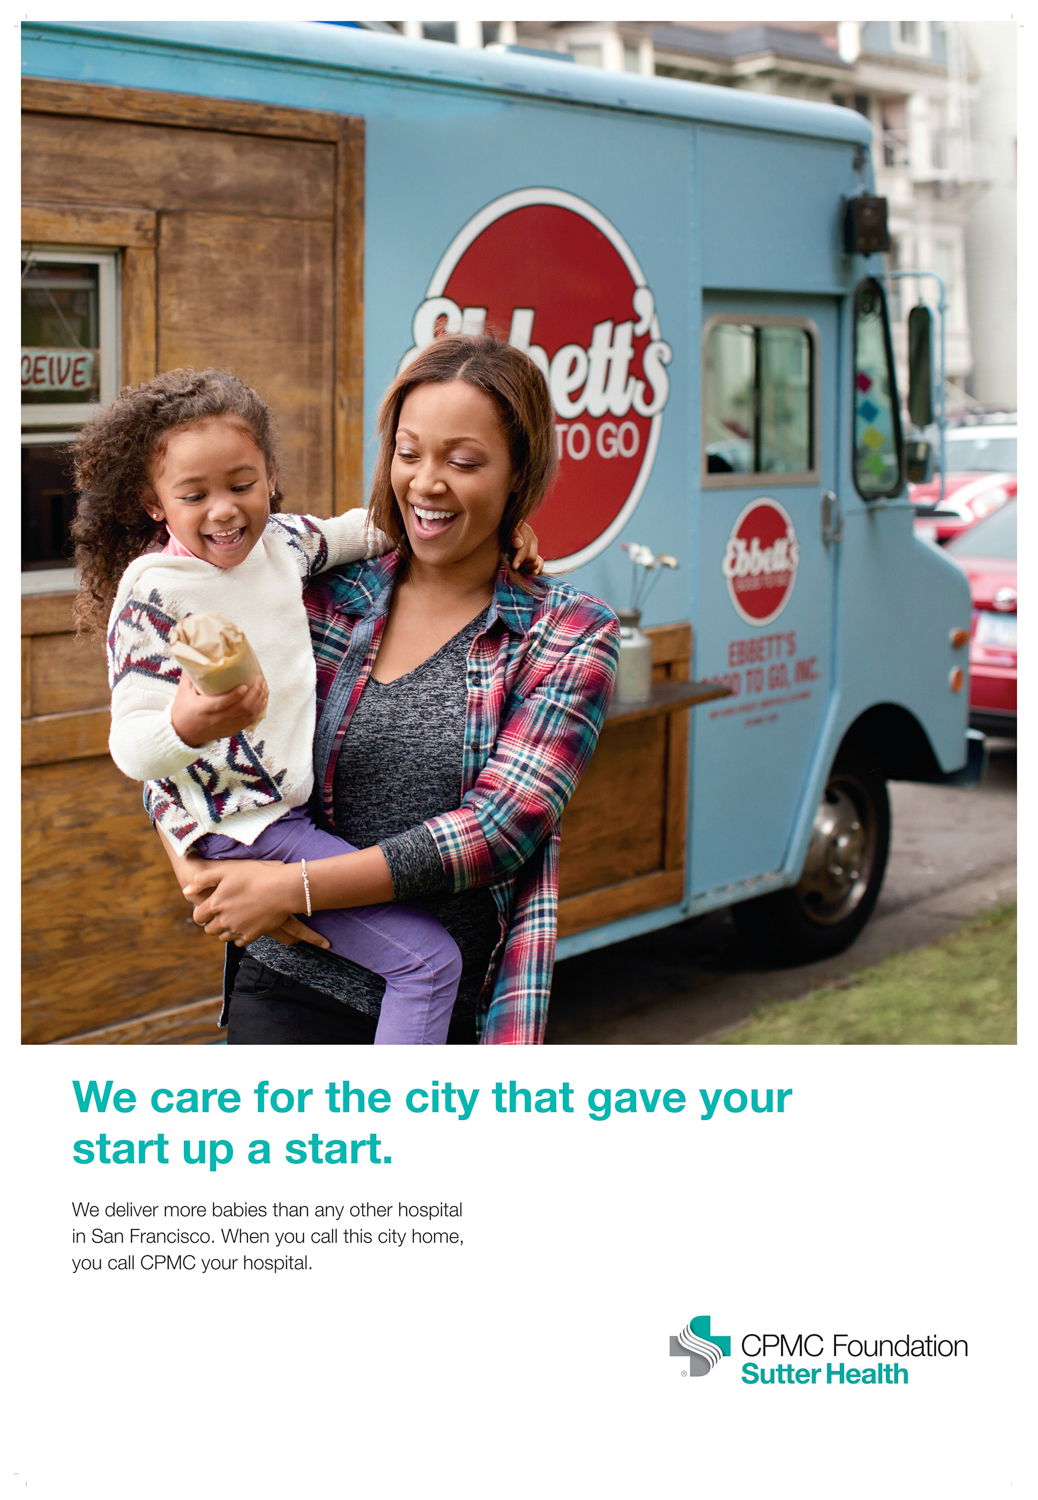 A woman and her young daughter get food from a food truck in a Healthcare Ad Campaign photographed by Lifestyle Photographer Diana Mulvihill